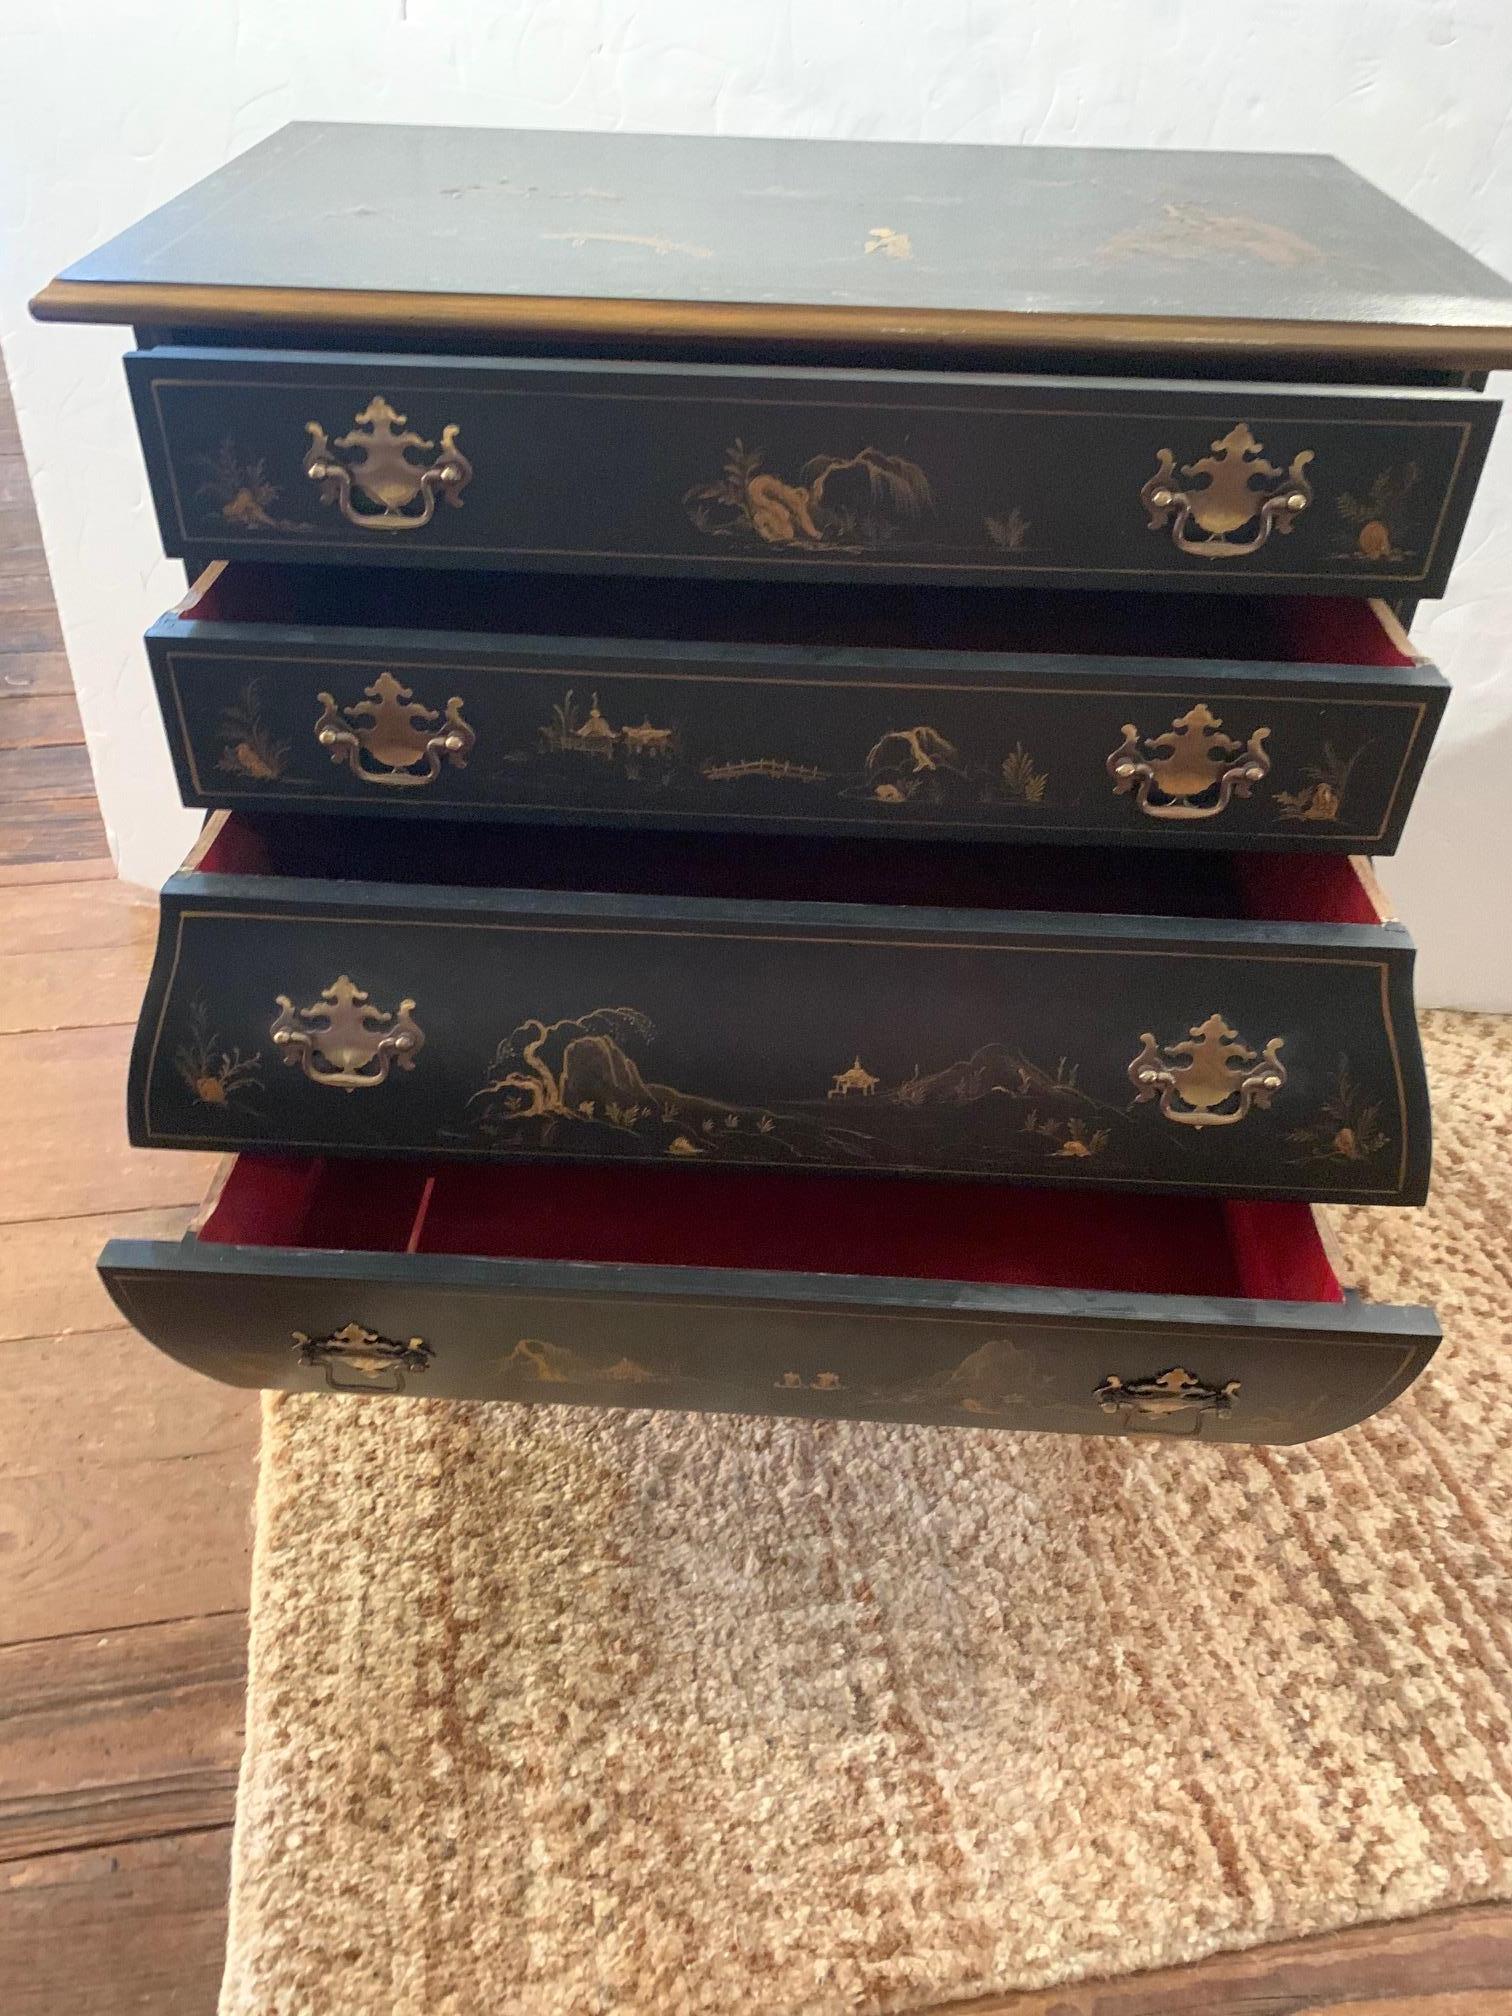 Wonderfully shaped black and gold chinoiserie vintage chest of drawers having 4 drawers, bulbous bottom, cabriole legs with ball and claw feet, and chippendale style brass hardware. Painted decoration is lovely and includes figures, pagodas, birds